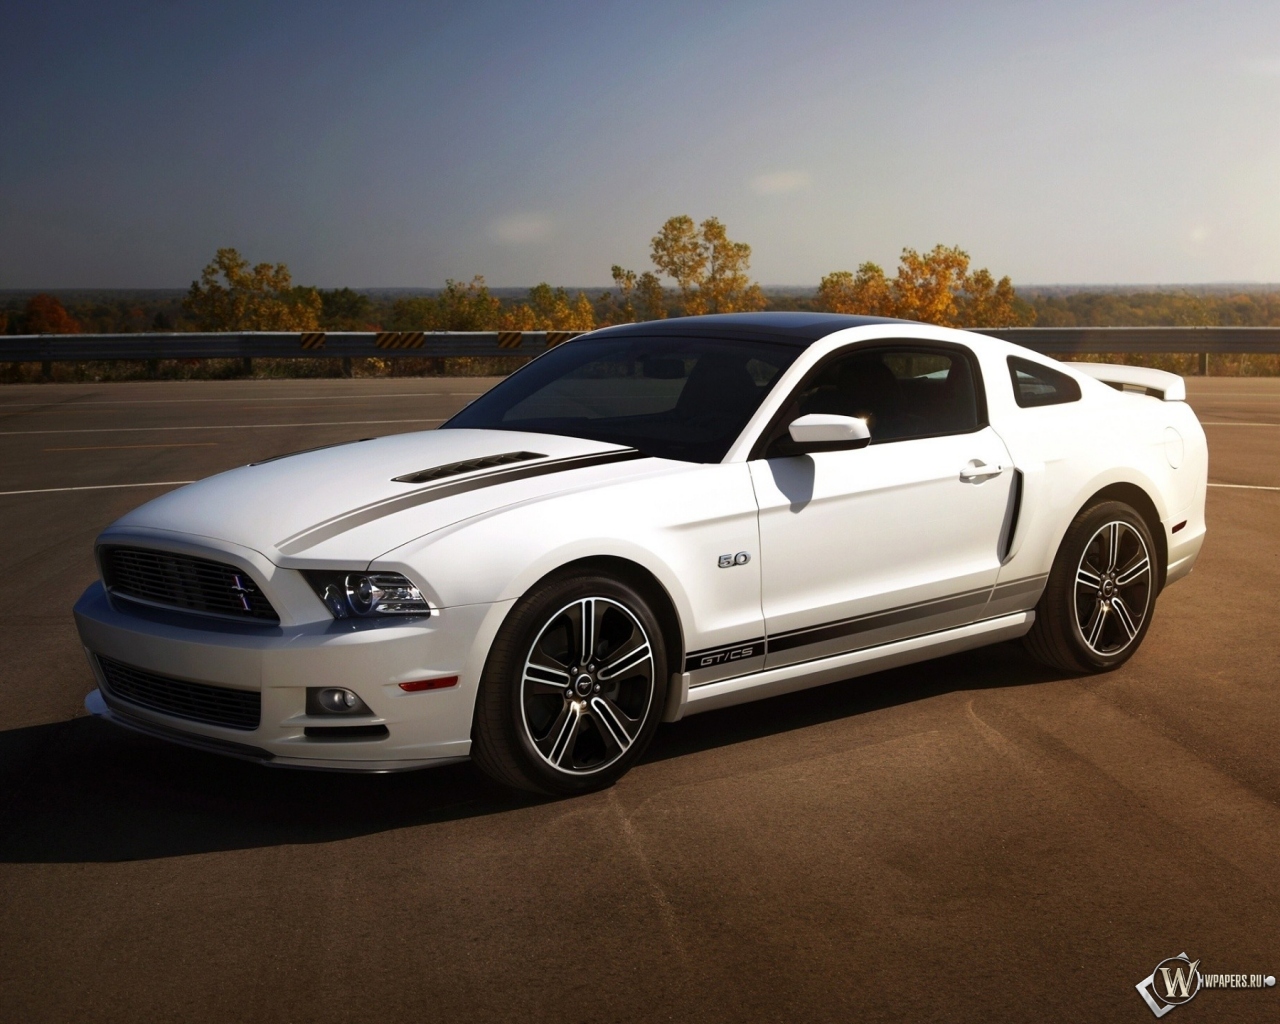 Ford Mustang V8 5.0 1280x1024